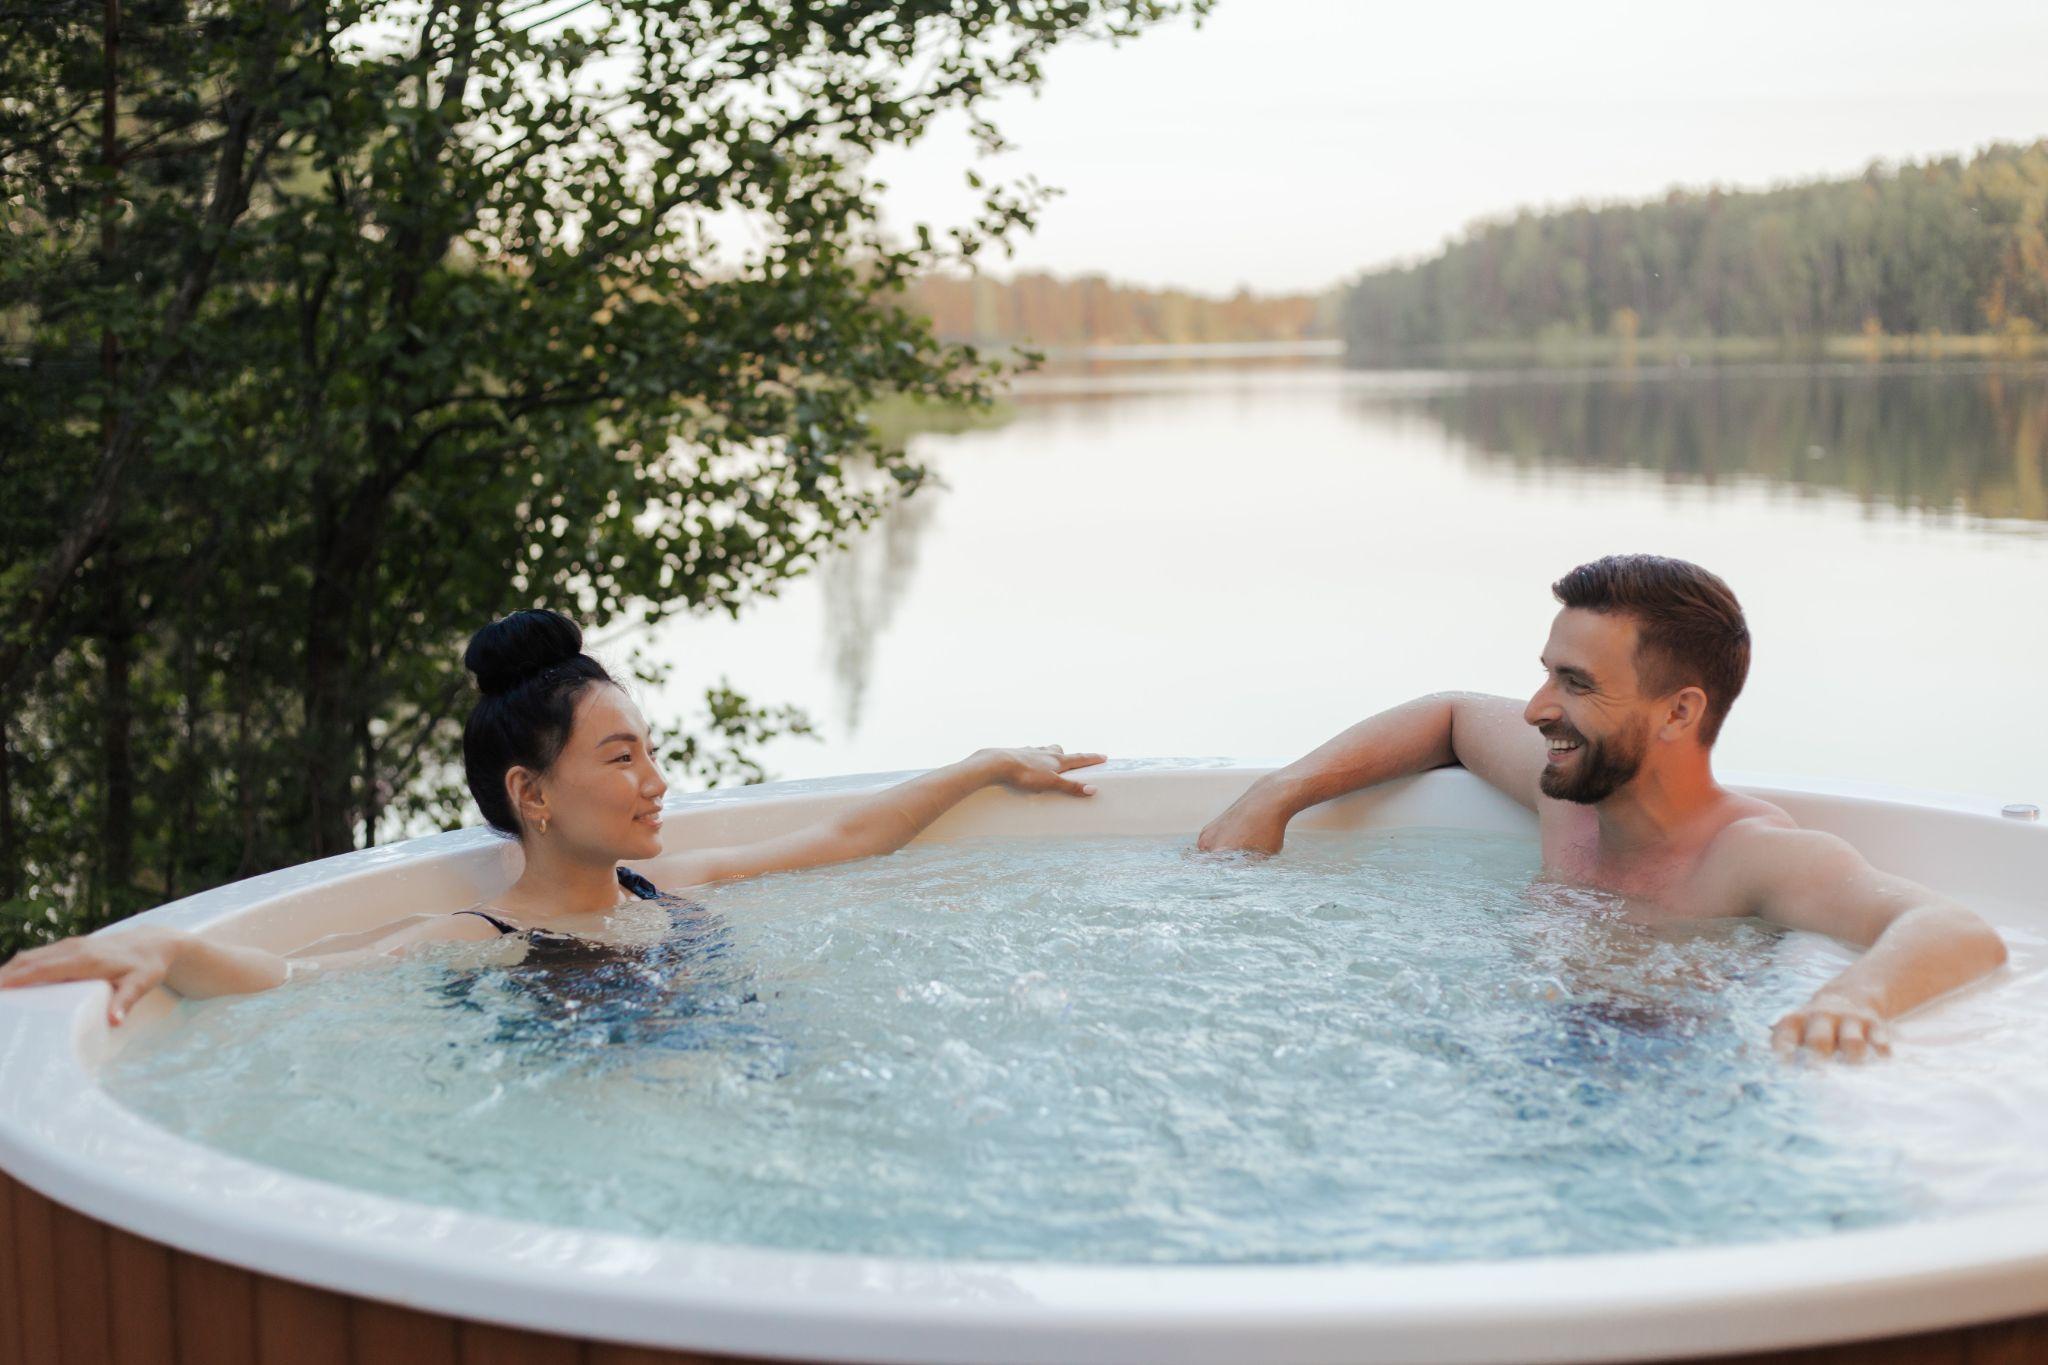 Two people lounging in an outdoor hot tub next to a wooded lake.